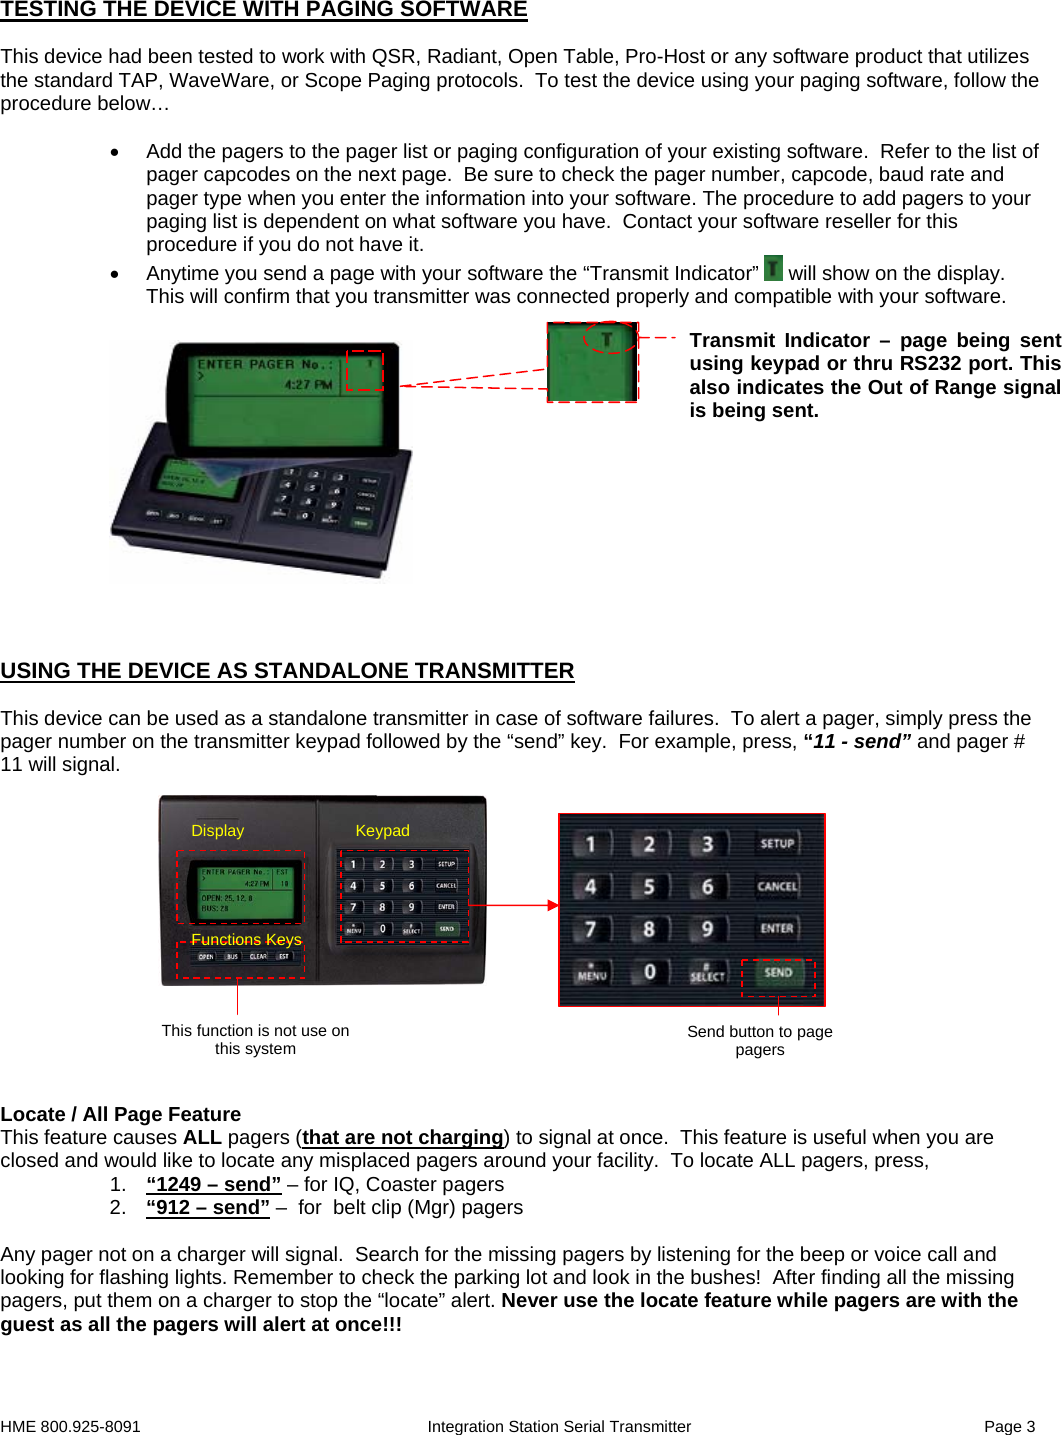 HME 800.925-8091                                                        Integration Station Serial Transmitter                                                                 Page 3  Keypad Functions Keys Display Send button to page pagers This function is not use on this system TESTING THE DEVICE WITH PAGING SOFTWARE  This device had been tested to work with QSR, Radiant, Open Table, Pro-Host or any software product that utilizes the standard TAP, WaveWare, or Scope Paging protocols.  To test the device using your paging software, follow the procedure below…  •  Add the pagers to the pager list or paging configuration of your existing software.  Refer to the list of pager capcodes on the next page.  Be sure to check the pager number, capcode, baud rate and pager type when you enter the information into your software. The procedure to add pagers to your paging list is dependent on what software you have.  Contact your software reseller for this procedure if you do not have it. •  Anytime you send a page with your software the “Transmit Indicator”   will show on the display.  This will confirm that you transmitter was connected properly and compatible with your software.               USING THE DEVICE AS STANDALONE TRANSMITTER   This device can be used as a standalone transmitter in case of software failures.  To alert a pager, simply press the pager number on the transmitter keypad followed by the “send” key.  For example, press, “11 - send” and pager # 11 will signal.                 Locate / All Page Feature This feature causes ALL pagers (that are not charging) to signal at once.  This feature is useful when you are closed and would like to locate any misplaced pagers around your facility.  To locate ALL pagers, press, 1.  “1249 – send” – for IQ, Coaster pagers 2.  “912 – send” –  for  belt clip (Mgr) pagers  Any pager not on a charger will signal.  Search for the missing pagers by listening for the beep or voice call and looking for flashing lights. Remember to check the parking lot and look in the bushes!  After finding all the missing pagers, put them on a charger to stop the “locate” alert. Never use the locate feature while pagers are with the guest as all the pagers will alert at once!!!      Transmit Indicator – page being sent using keypad or thru RS232 port. This also indicates the Out of Range signal is being sent. 